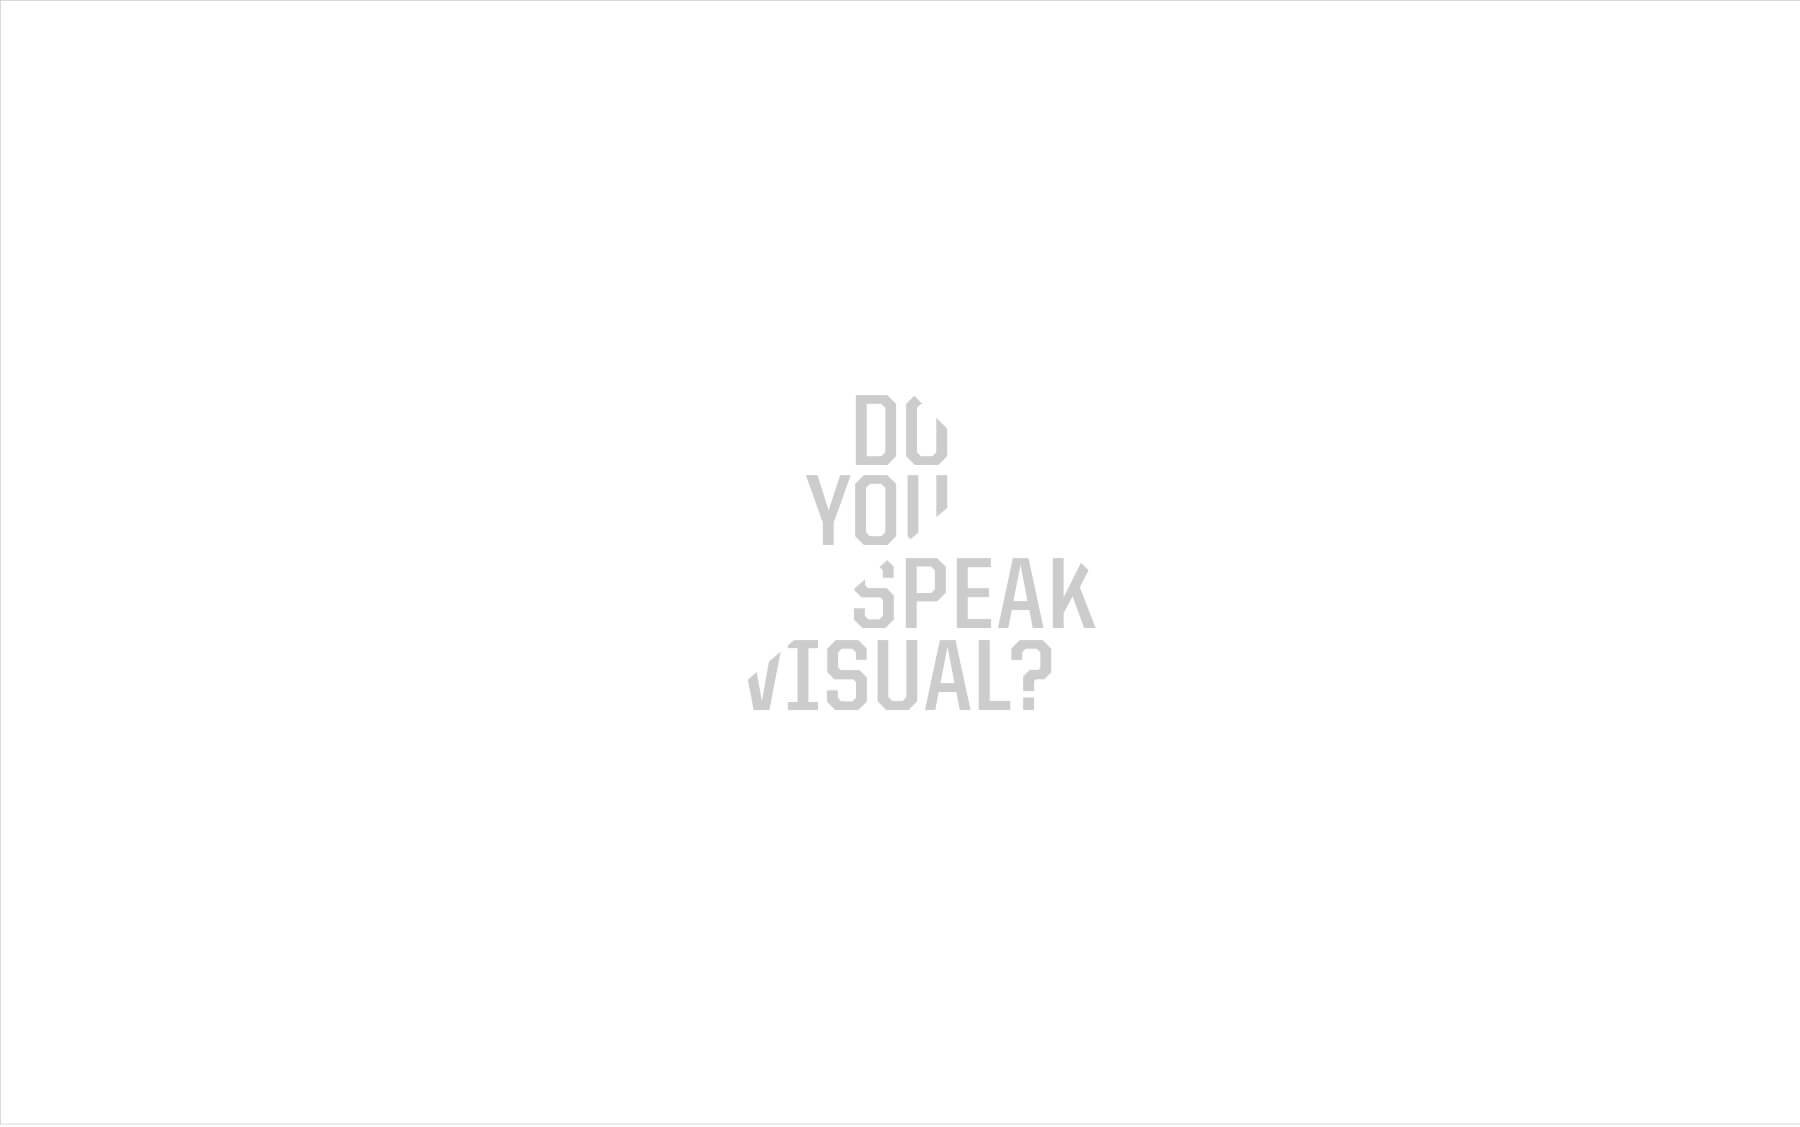 Icons And Kings: Do You Speak Visual